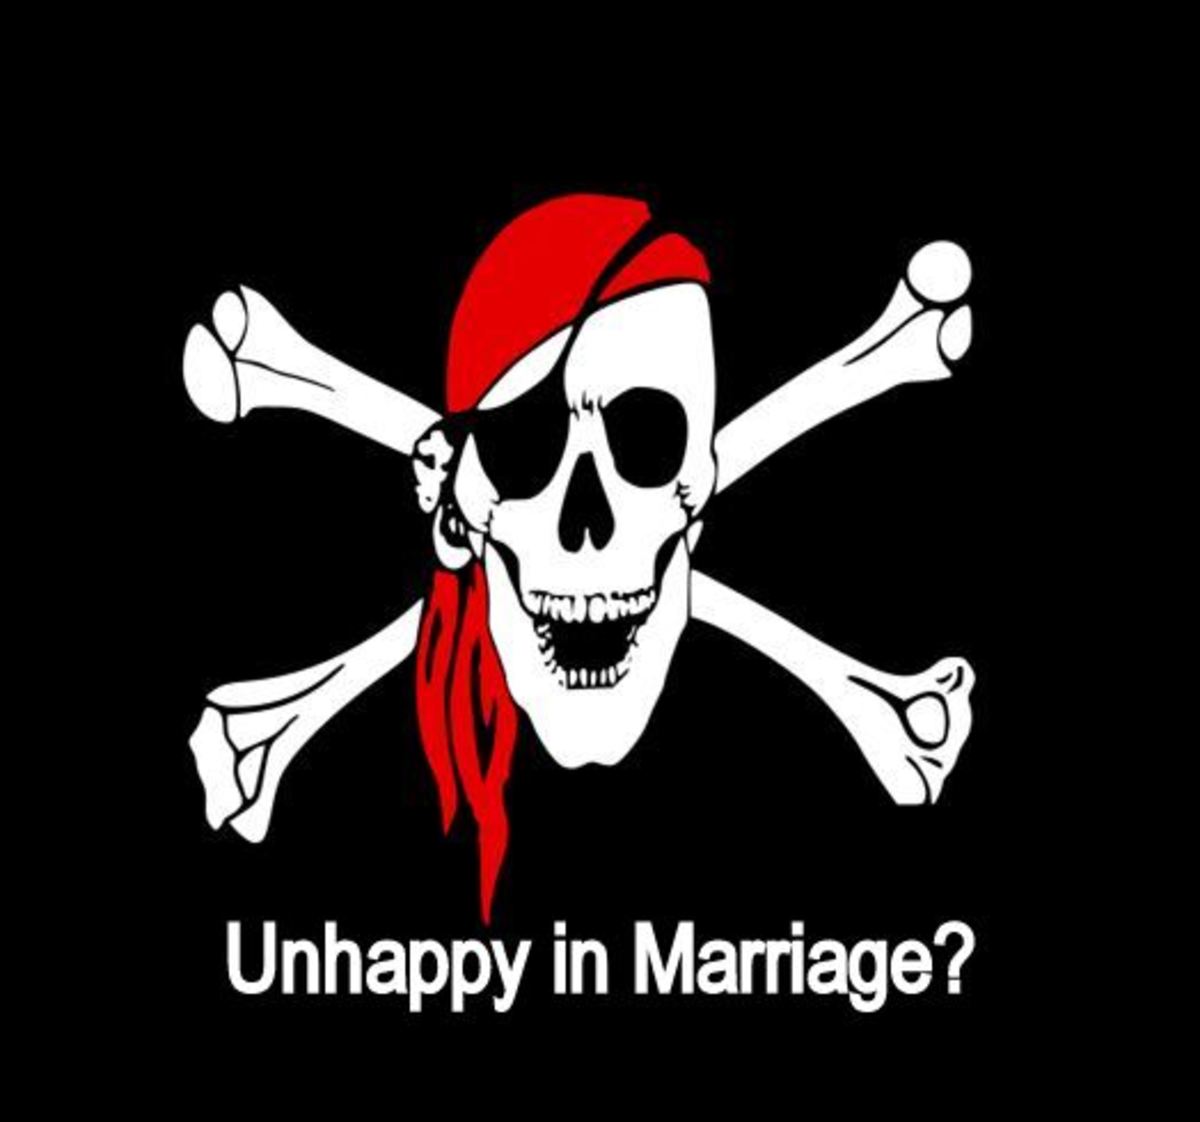 12 Signs of an Unhappy Marriage